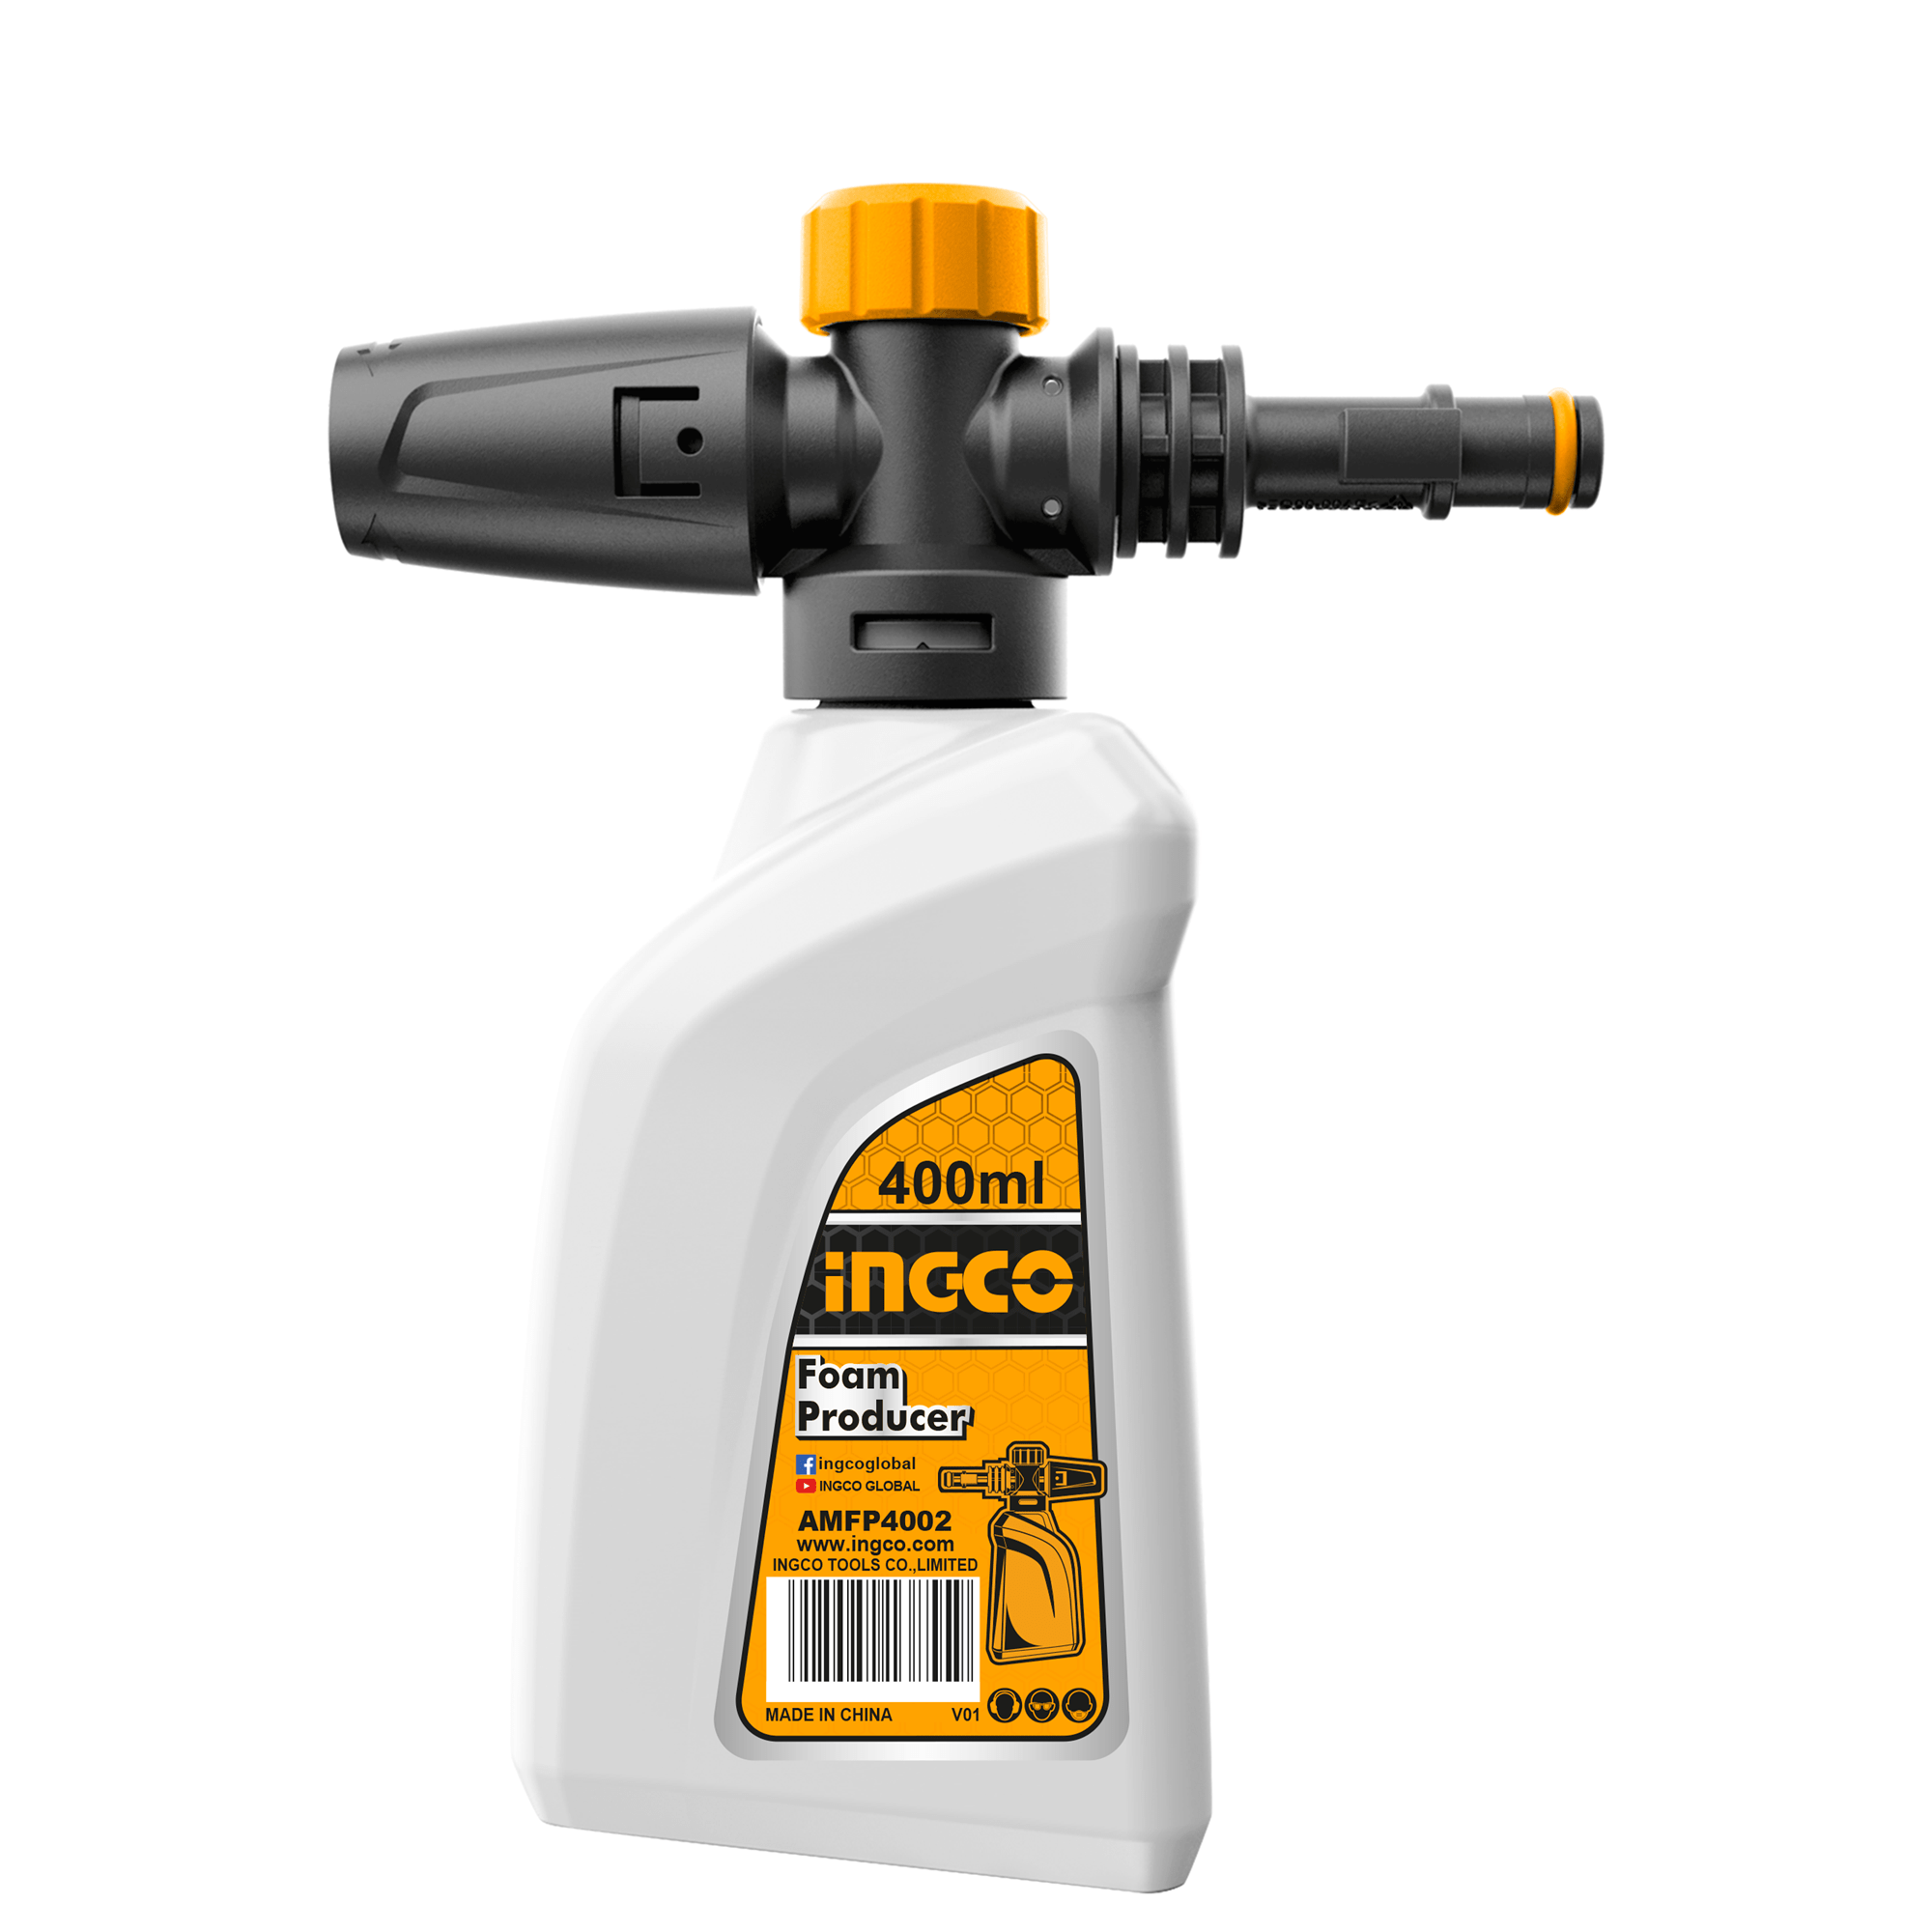 Ingco 400ML Lance Bottle Foam Producer For Pressure Washer - AMFP4002 | Supply Master Accra, Ghana Cleaning Equipment Accessories Buy Tools hardware Building materials